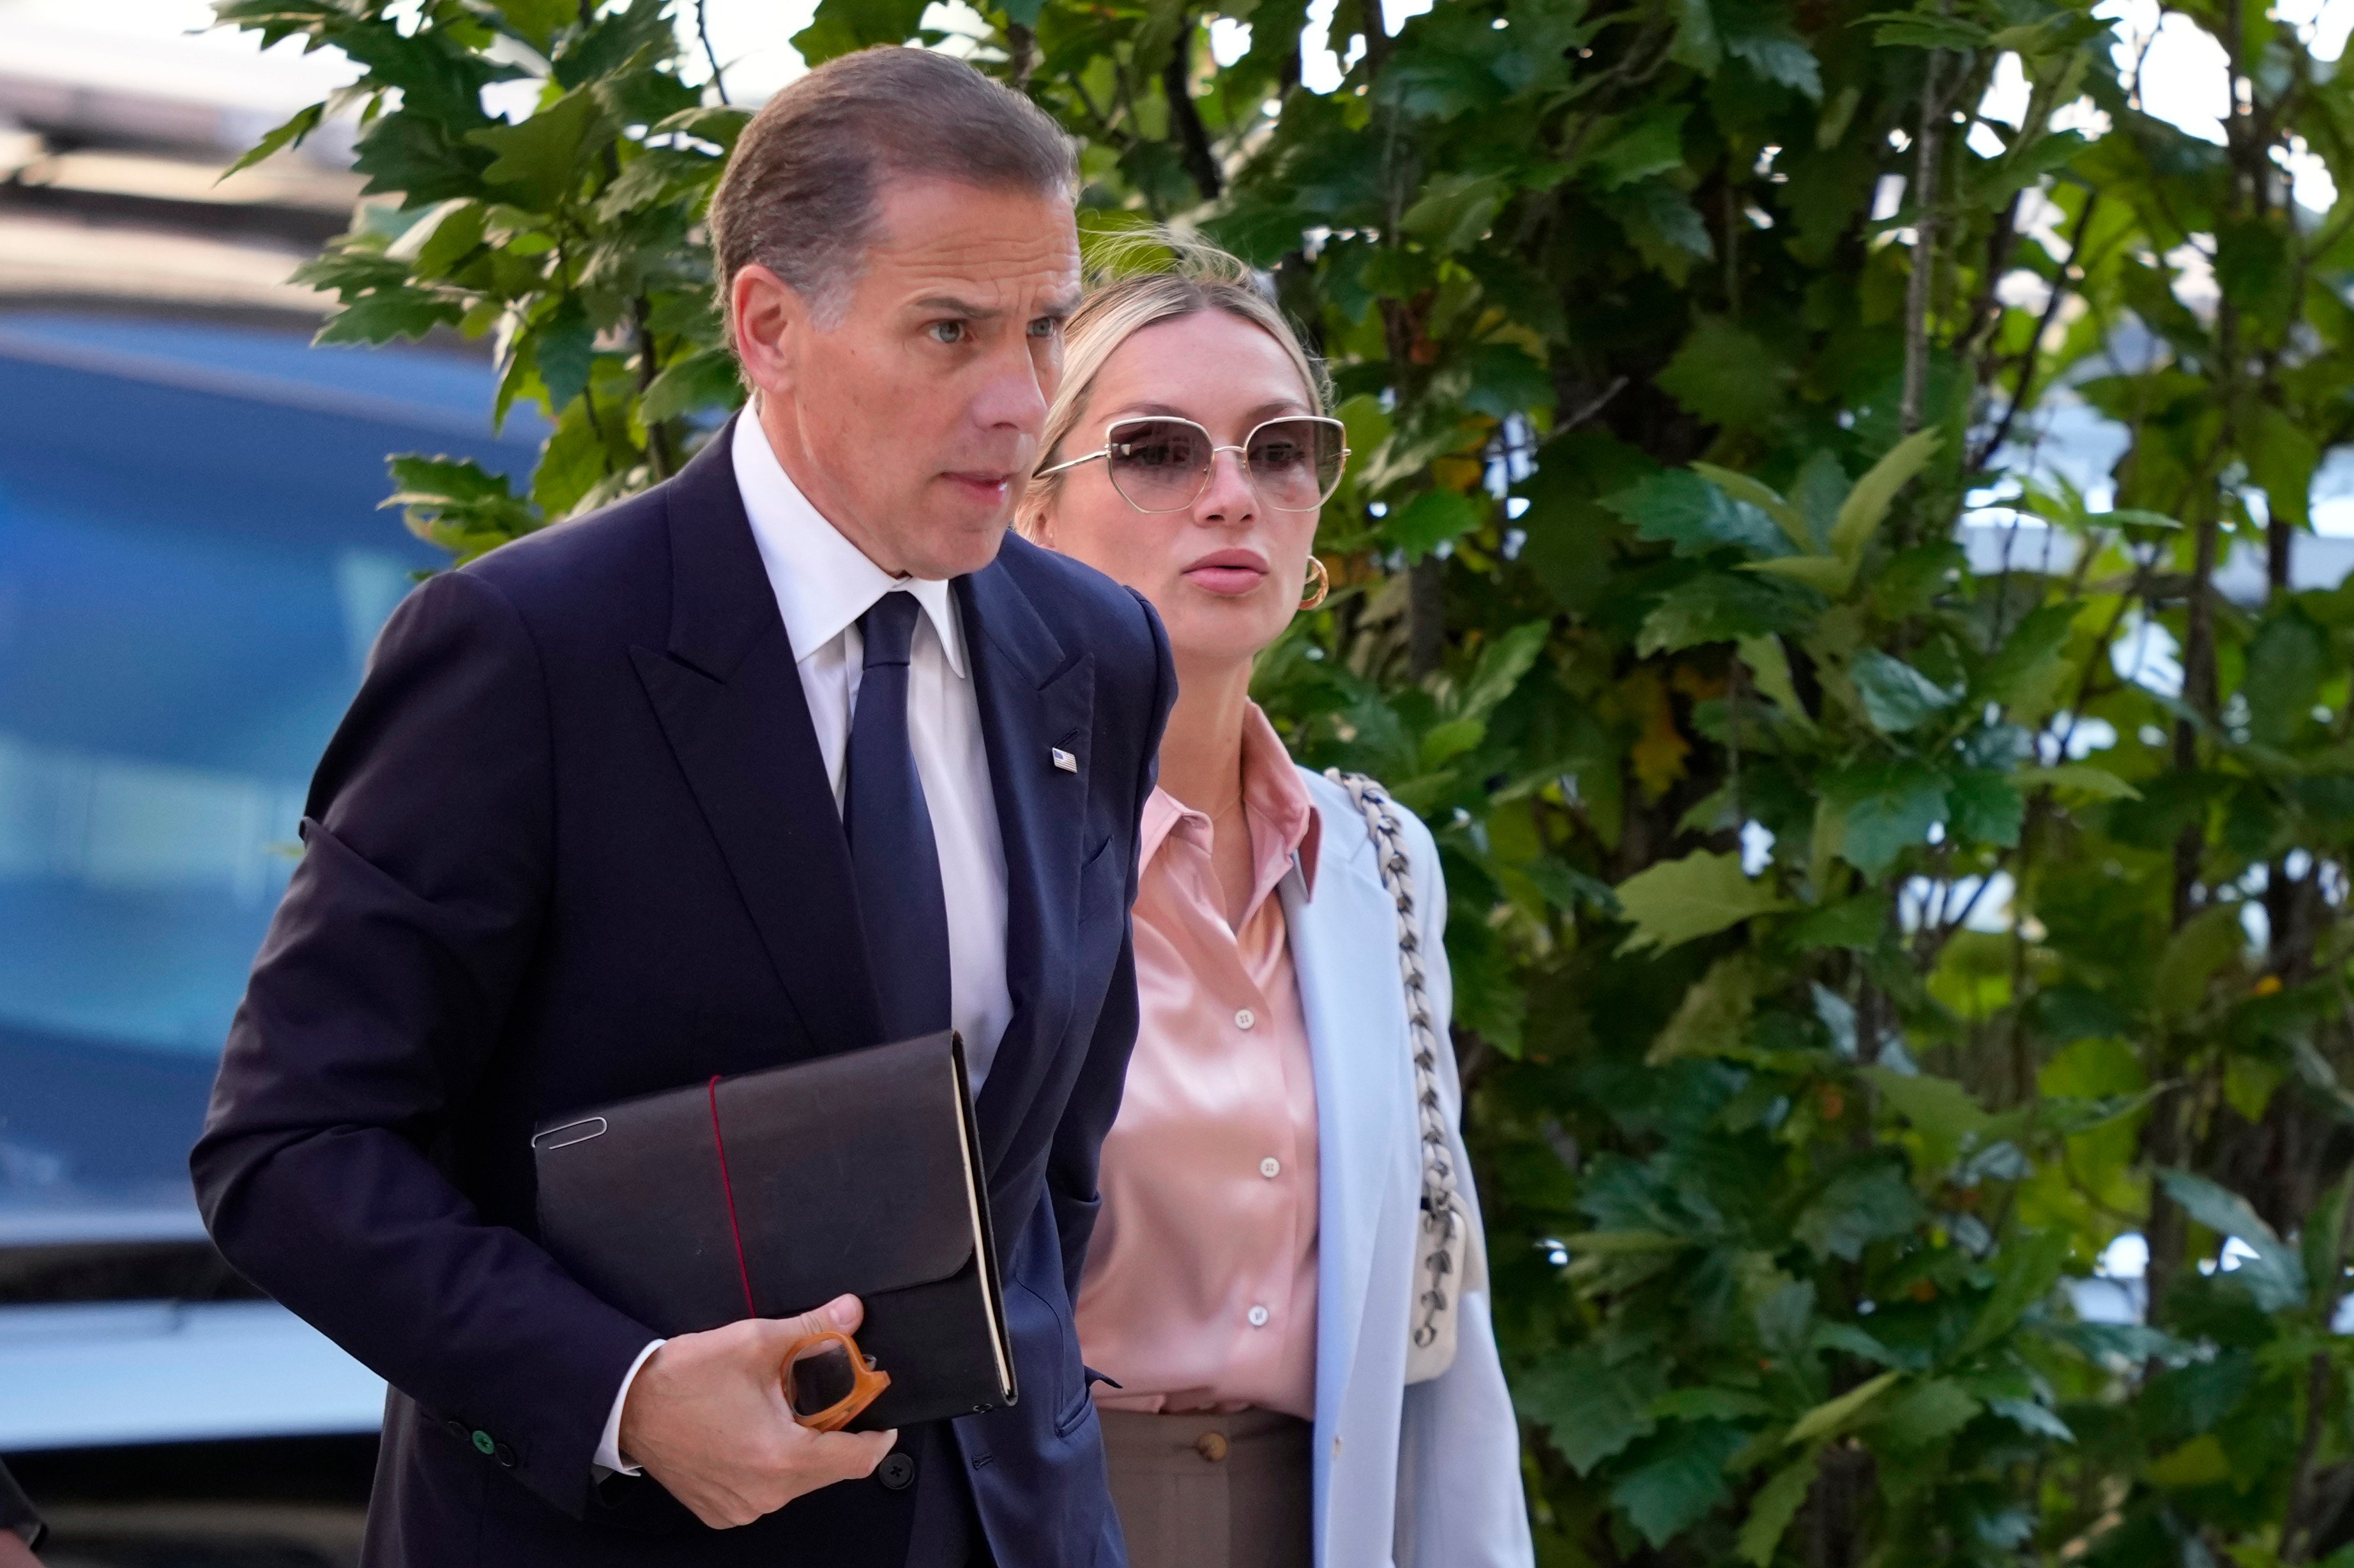 Hunter Biden arrives with his wife, Melissa Cohen Biden at federal court in Wilmington, Delaware, on Tuesday. Photo: AP